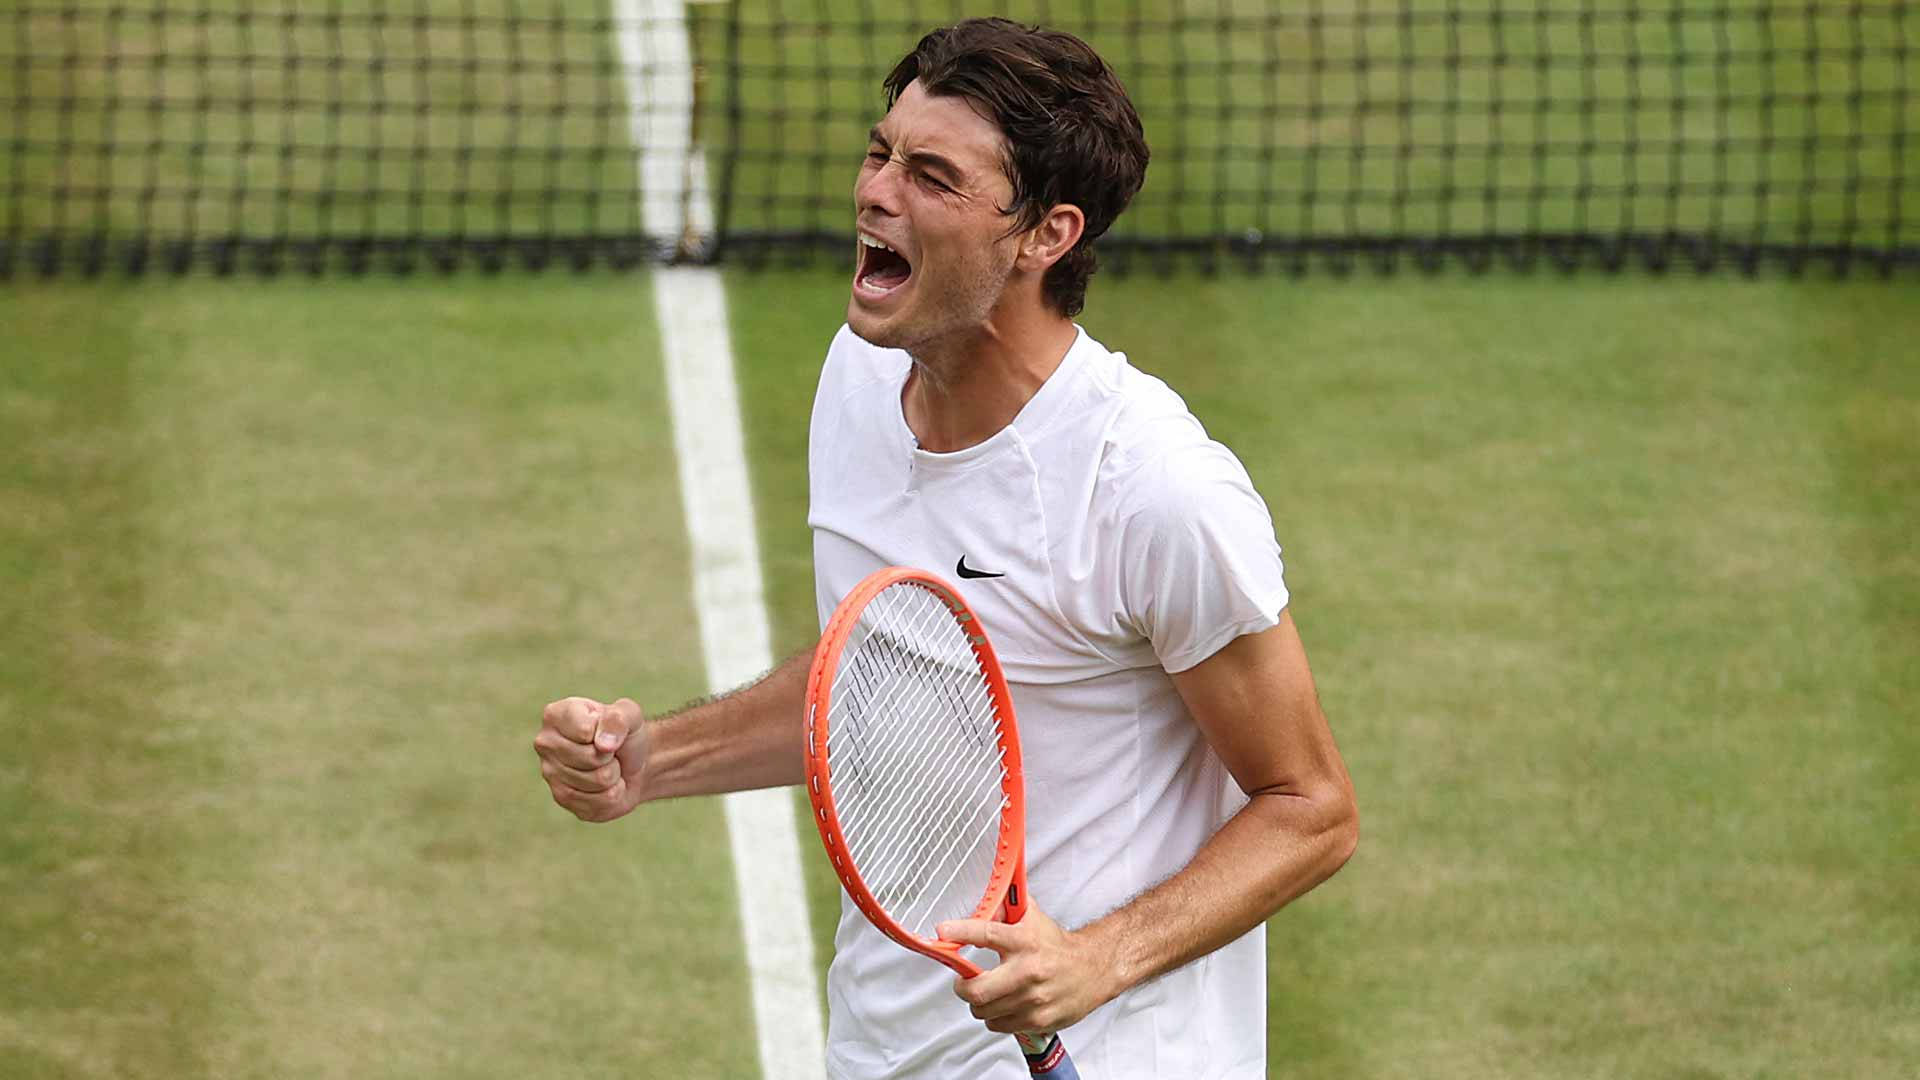 Victorious Shout - Taylor Fritz in His Moment of Triumph Wallpaper